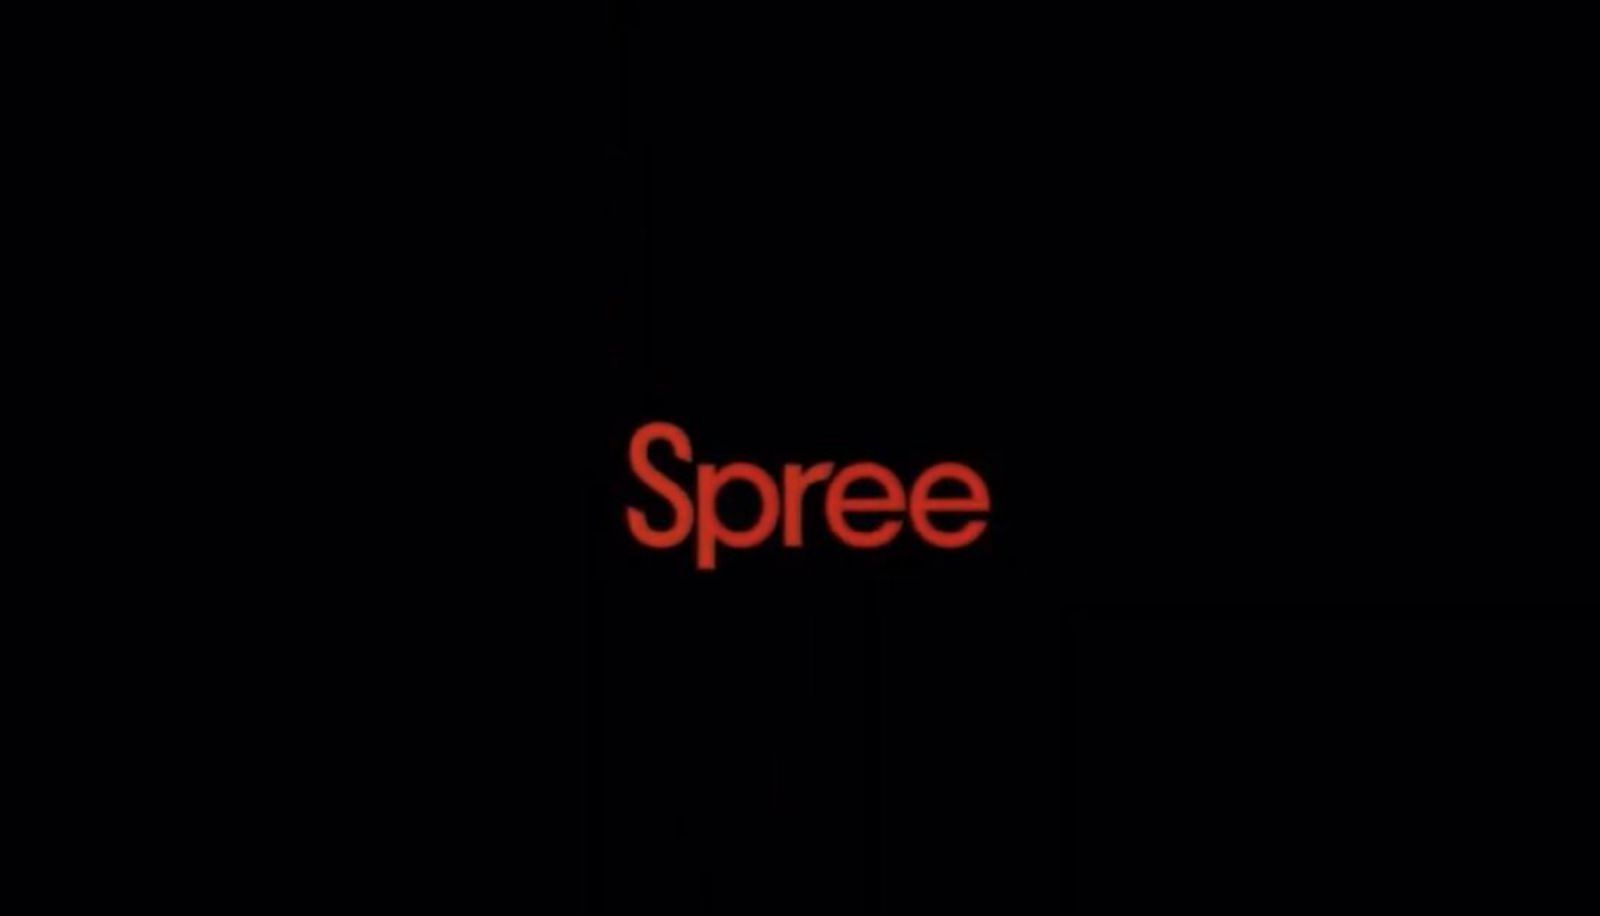 Is Spree based on a true story?